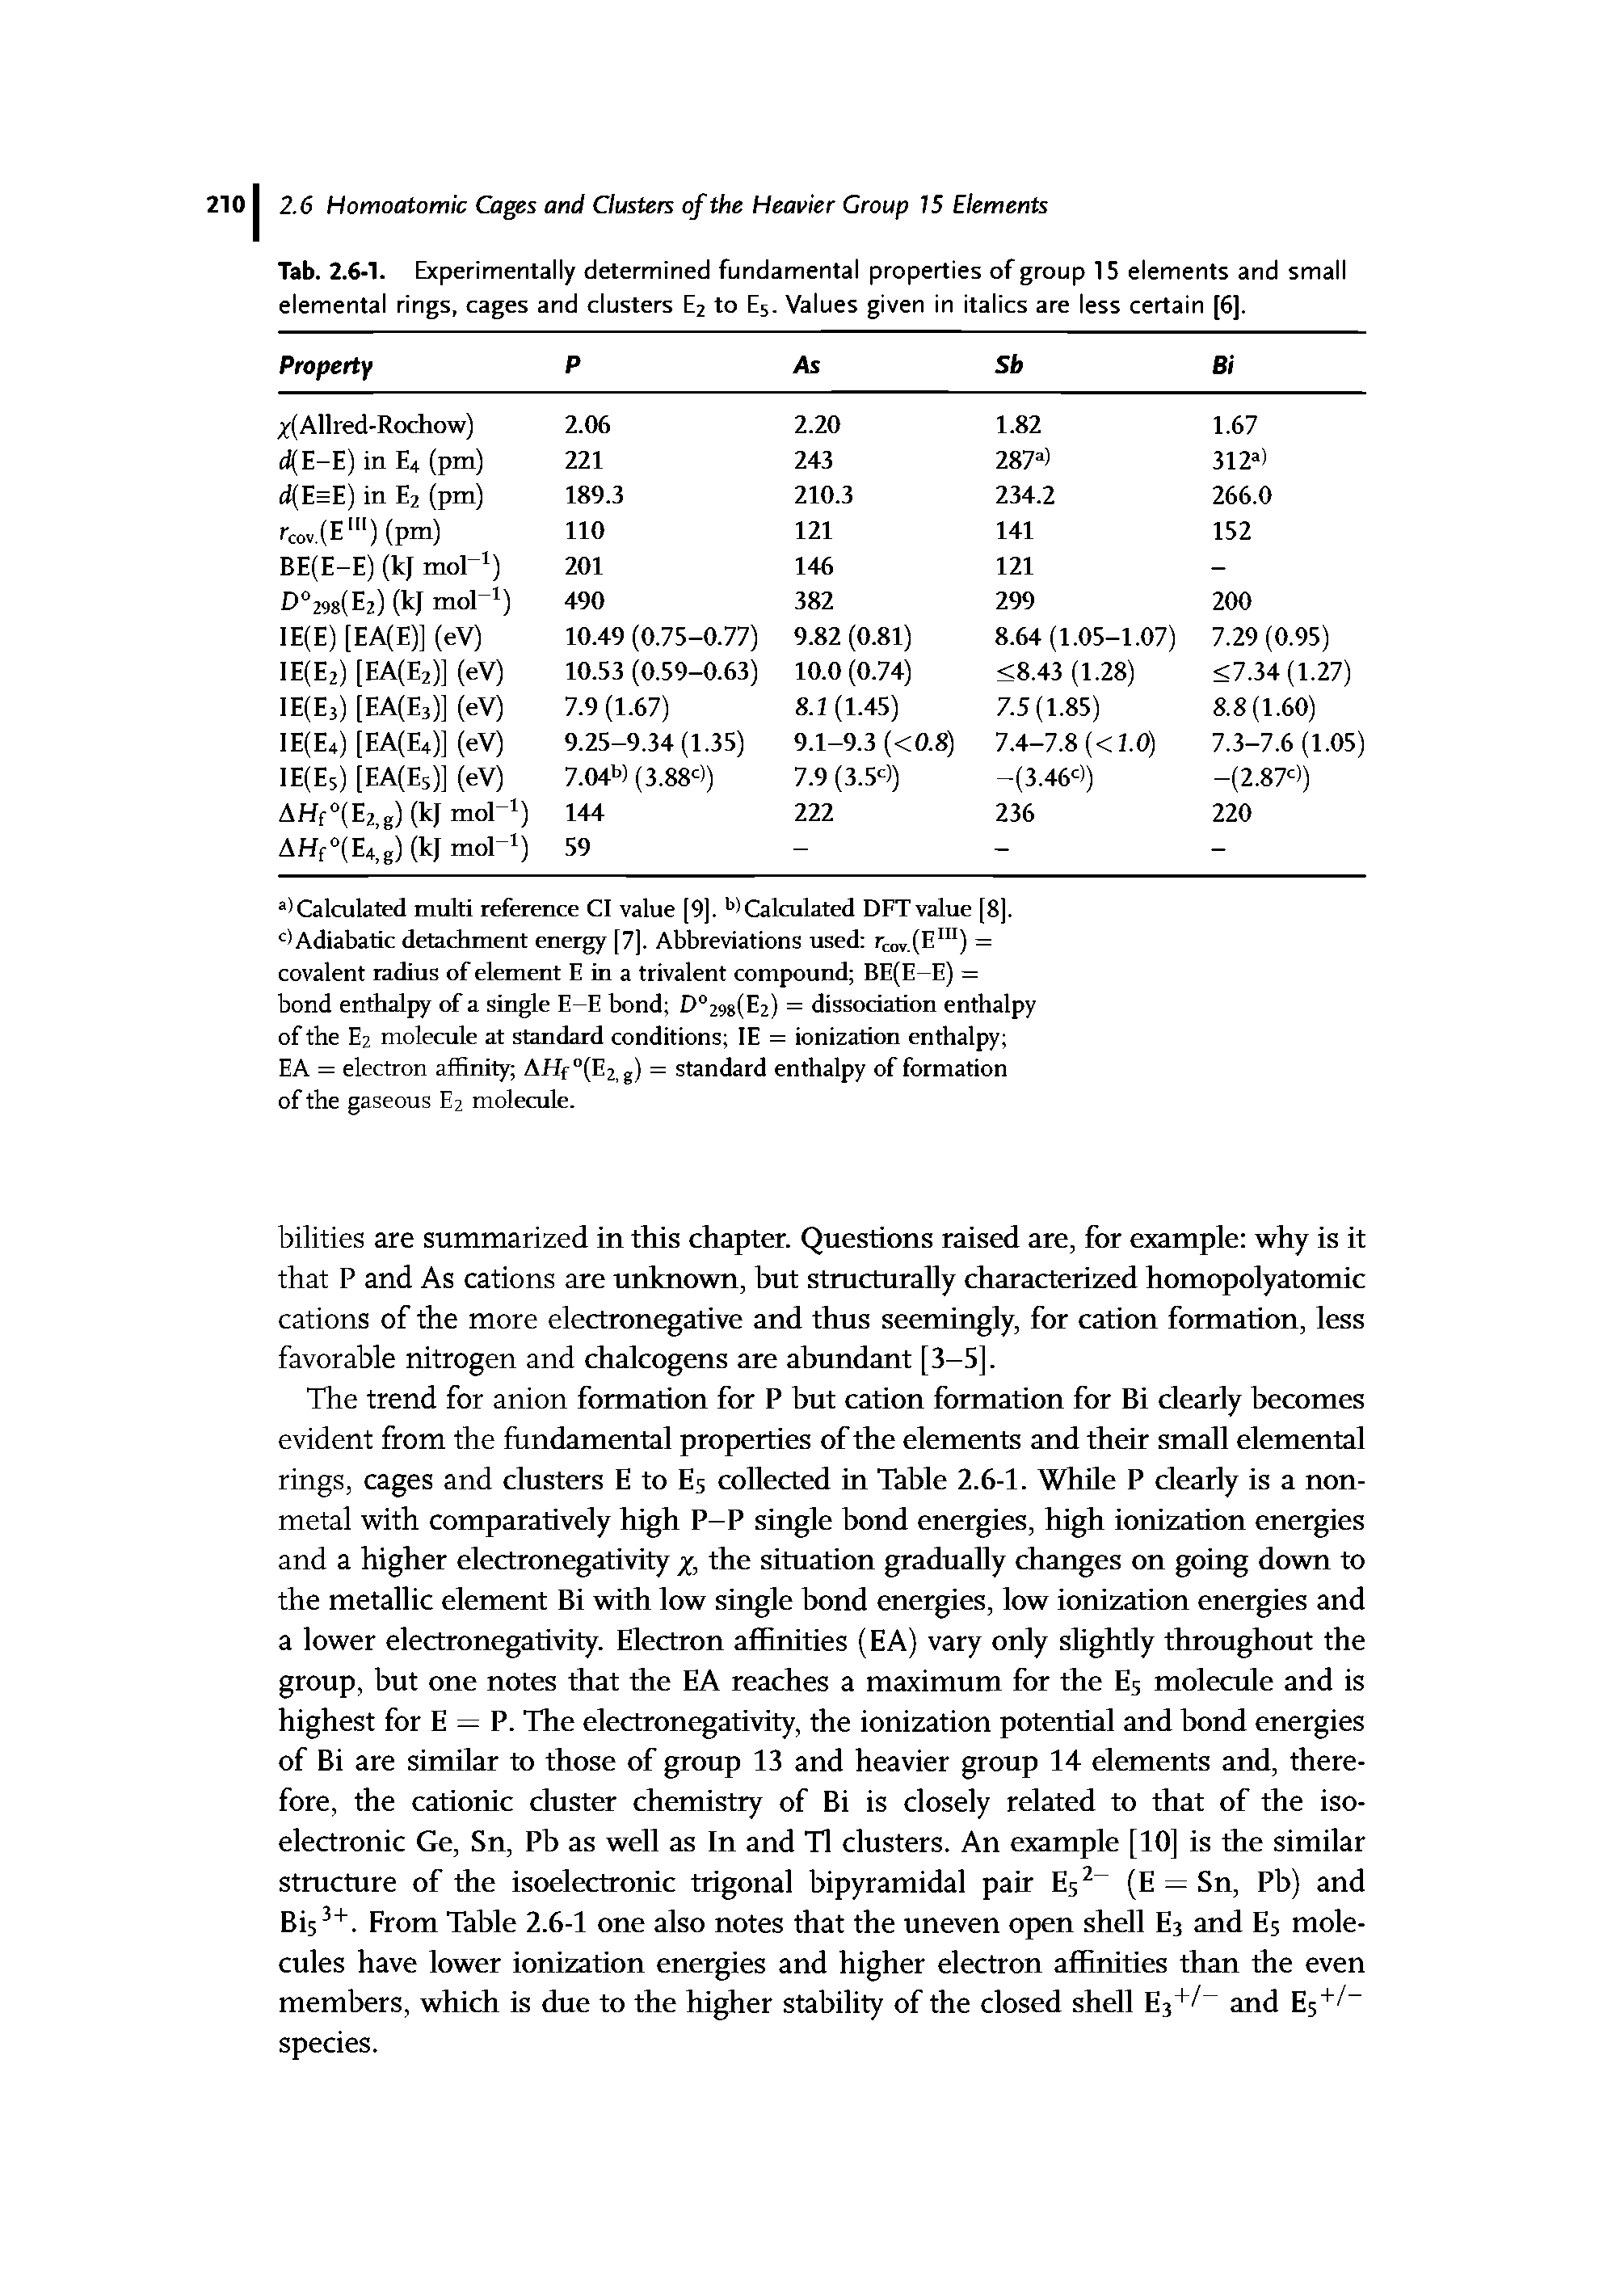 Tab. 2.6-1. Experimentally determined fundamental properties of group 15 elements and small elemental rings, cages and clusters E2 to E5. Values given in italics are less certain [6].